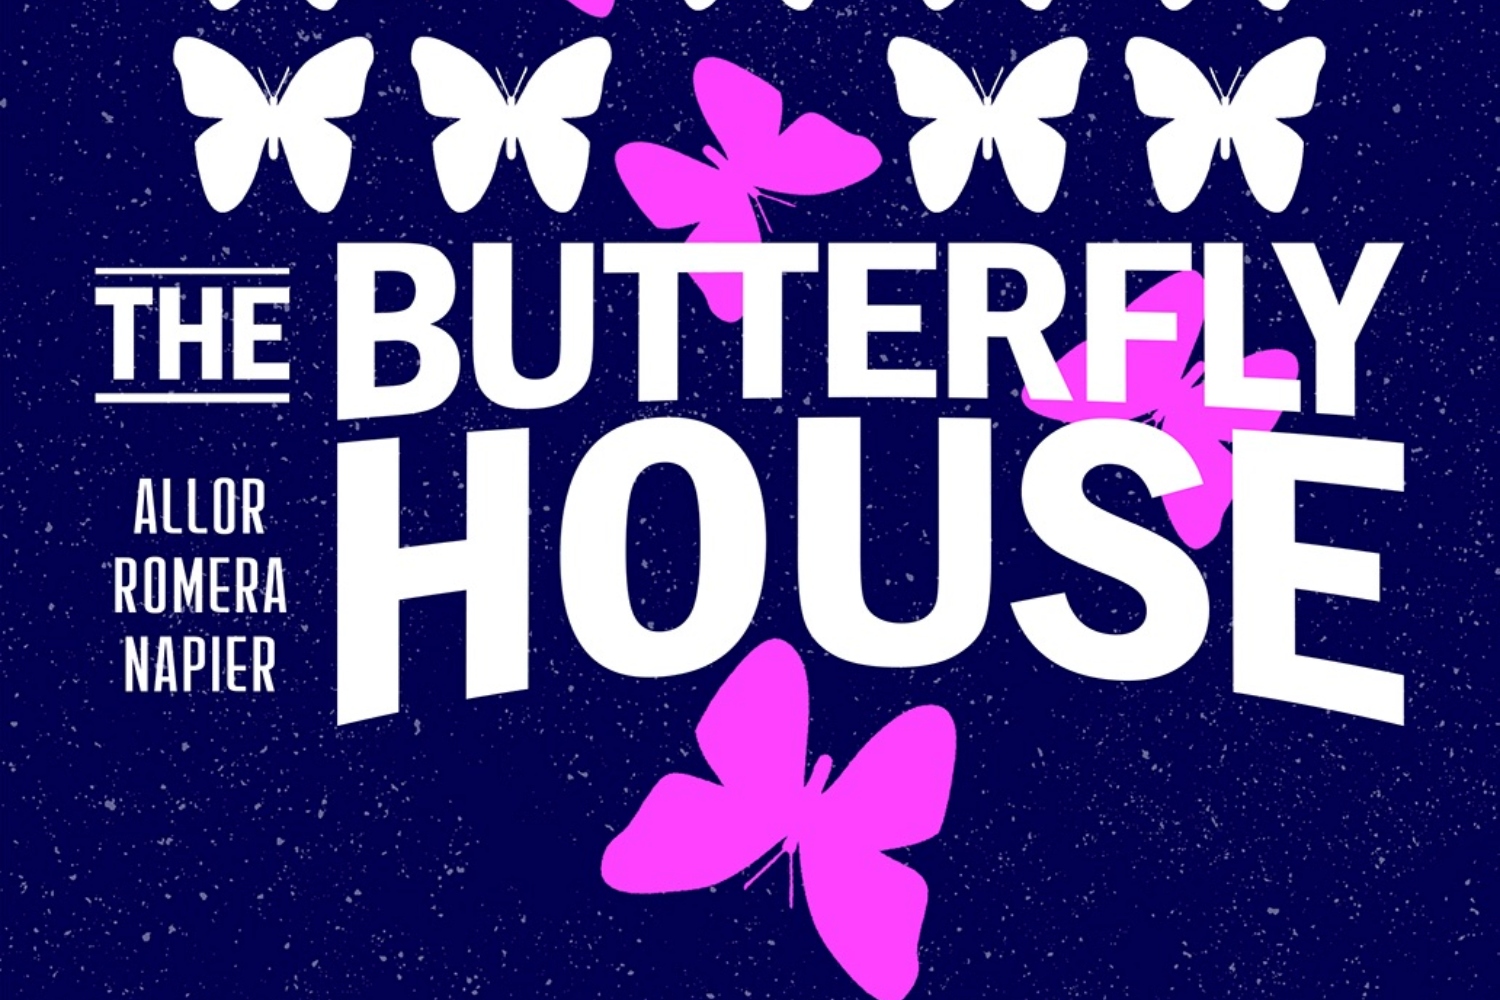 Paul Allor welcomes us to 'The Butterfly House'